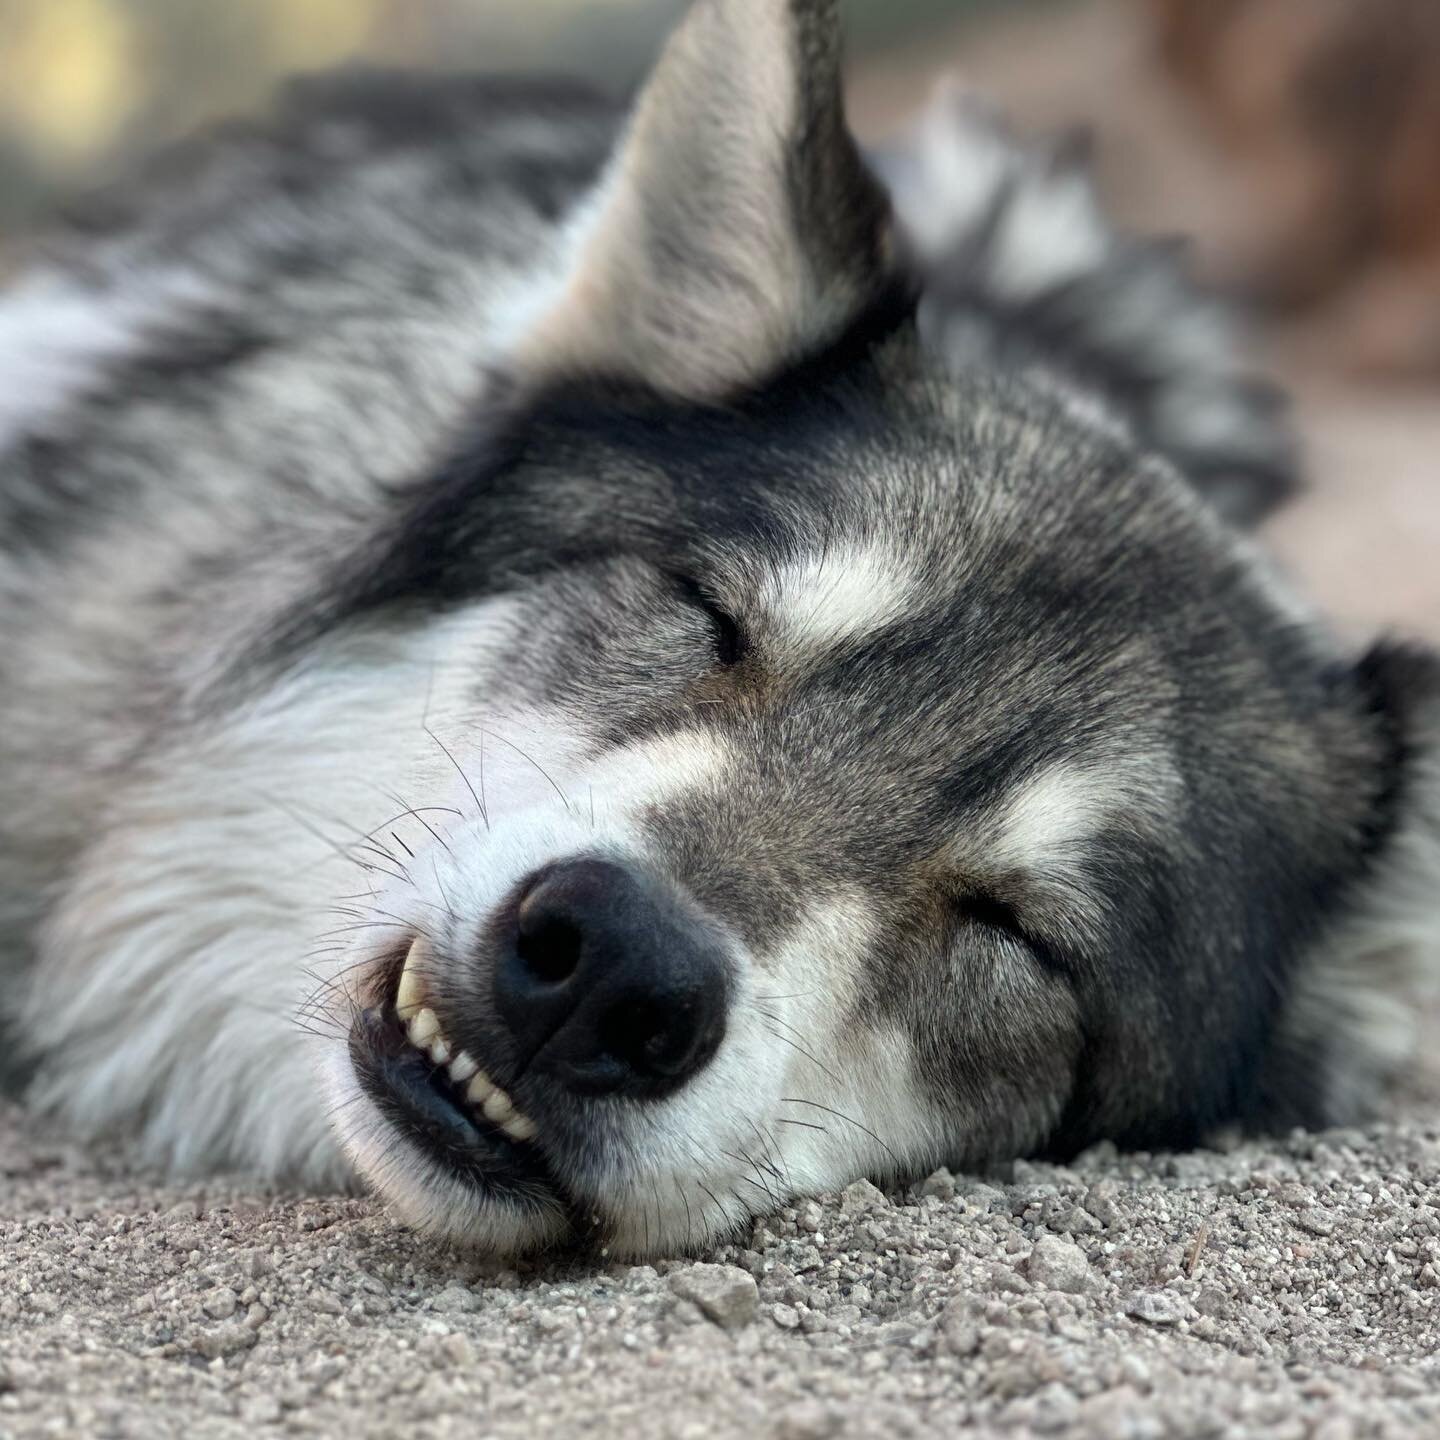 If Monday had a face.
#mondaymood 

Virtually adopt Loki or any of our pack members and support @apexprotectionproject by:

👉clicking the link in our bio
👉www.apexprotectionproject.org
👉donate though our Venmo or PayPal
👉share this post and tag a